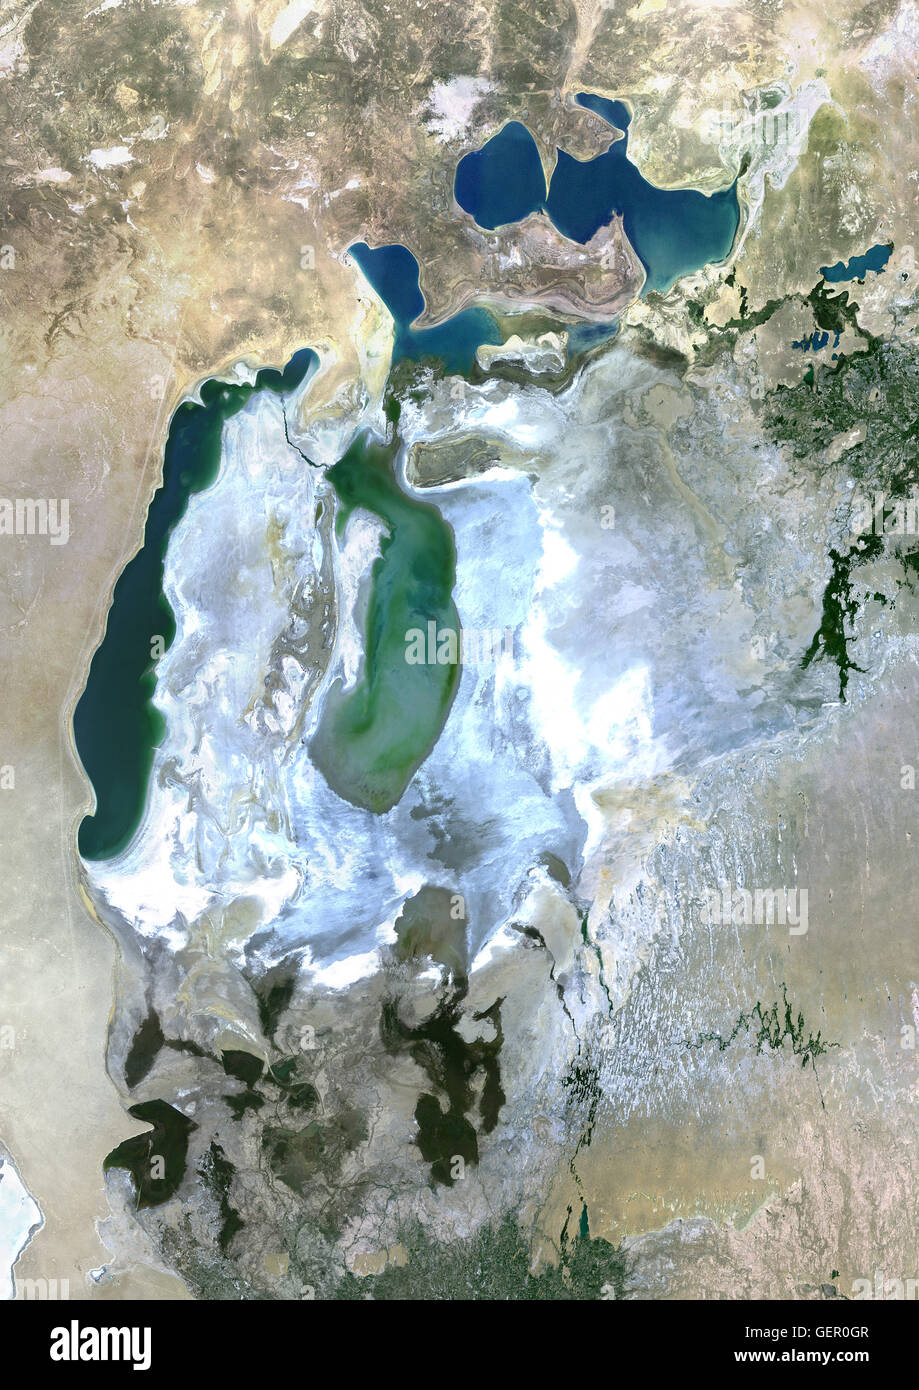 Satellite view of the Aral Sea in 2014. This image was taken by Landsat 8 satellite. Stock Photo